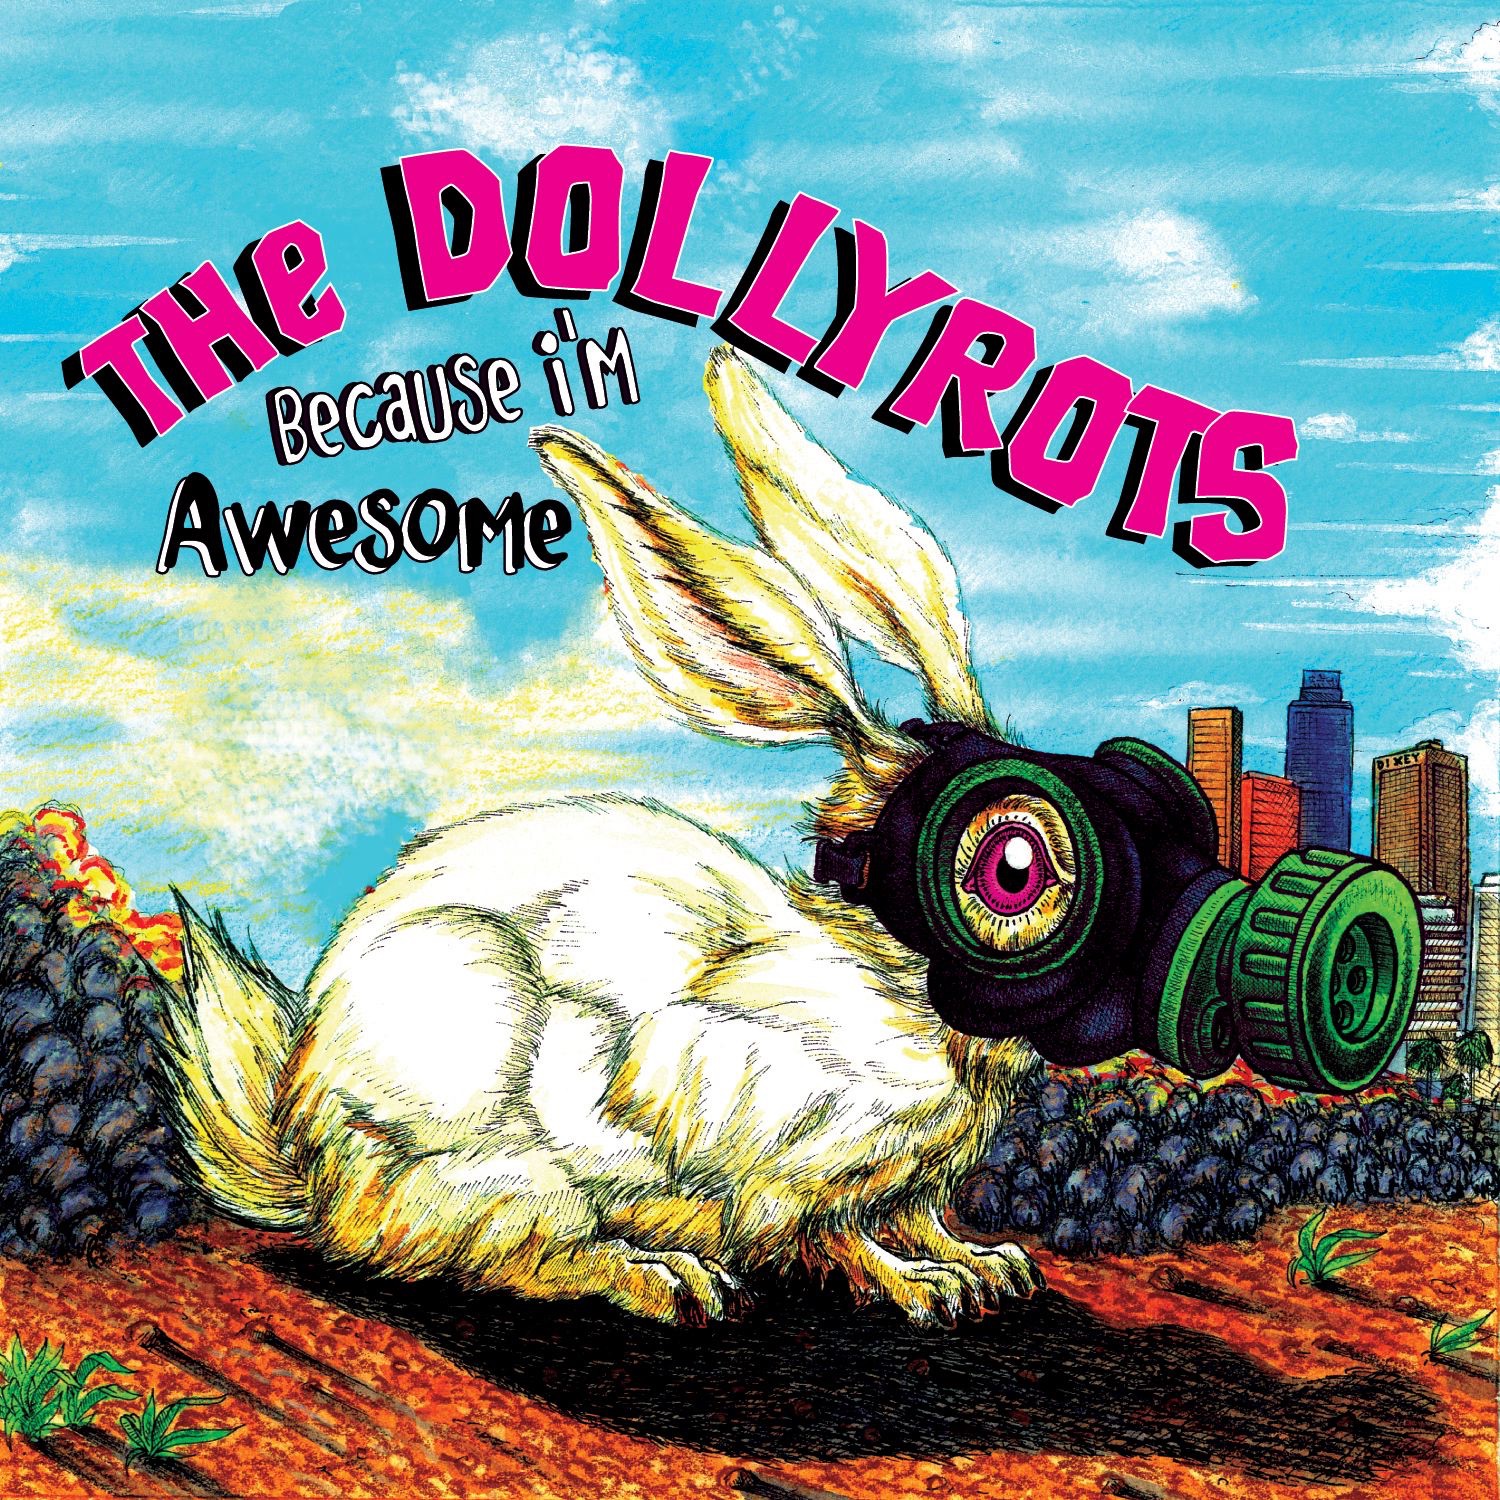 Art for Out of L.A. by The Dollyrots